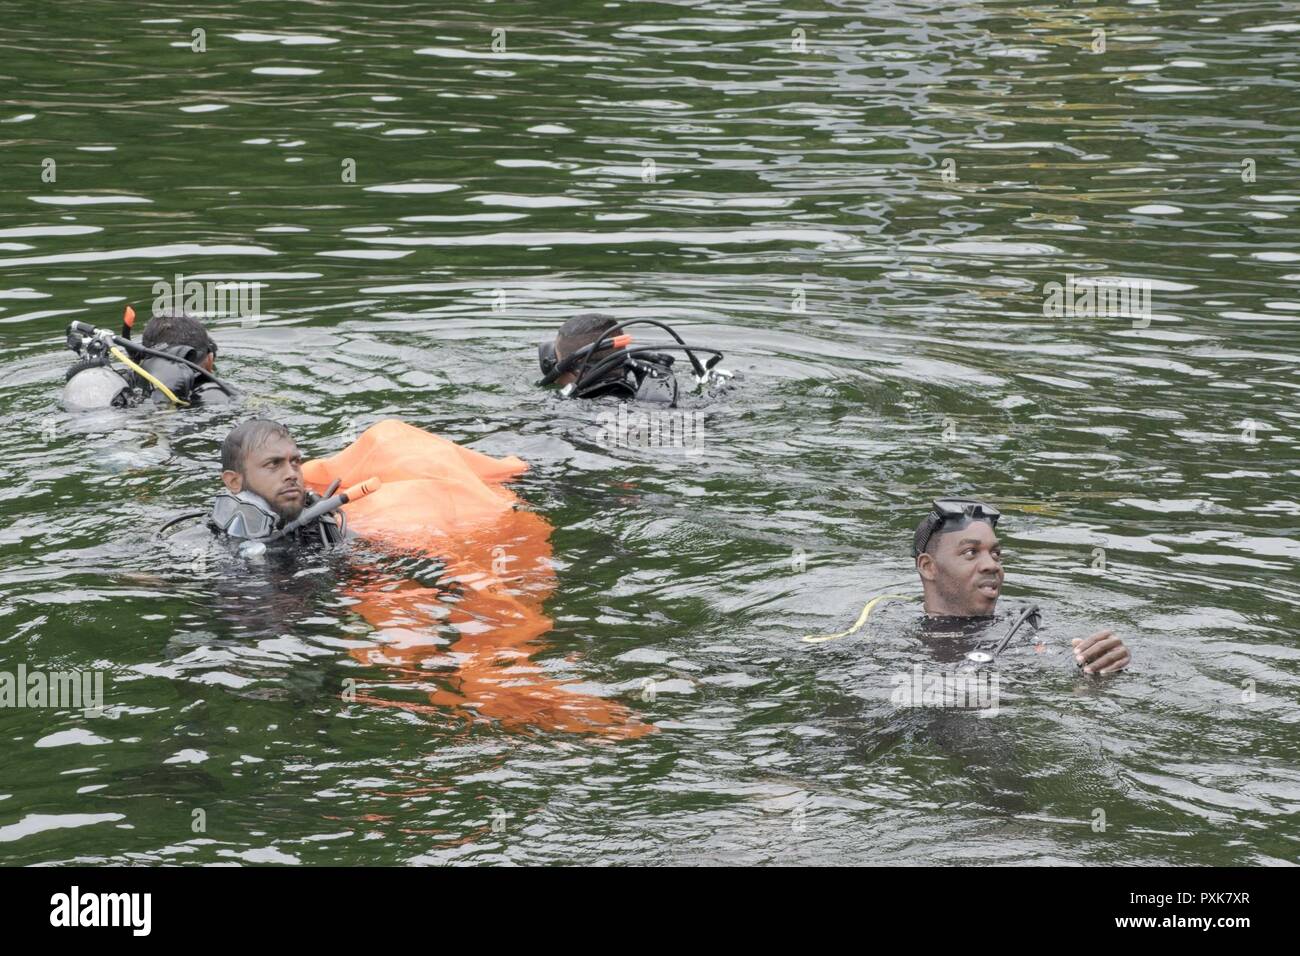 PORT OF SPAIN, Trinidad - Caribbean divers recover the simulated body during the evidence recovery dive training at Exercise TRADEWINDS 17 in Chaguaramas, Trinidad on June 5, 2017. (Canadian Forces Combat Camera Stock Photo